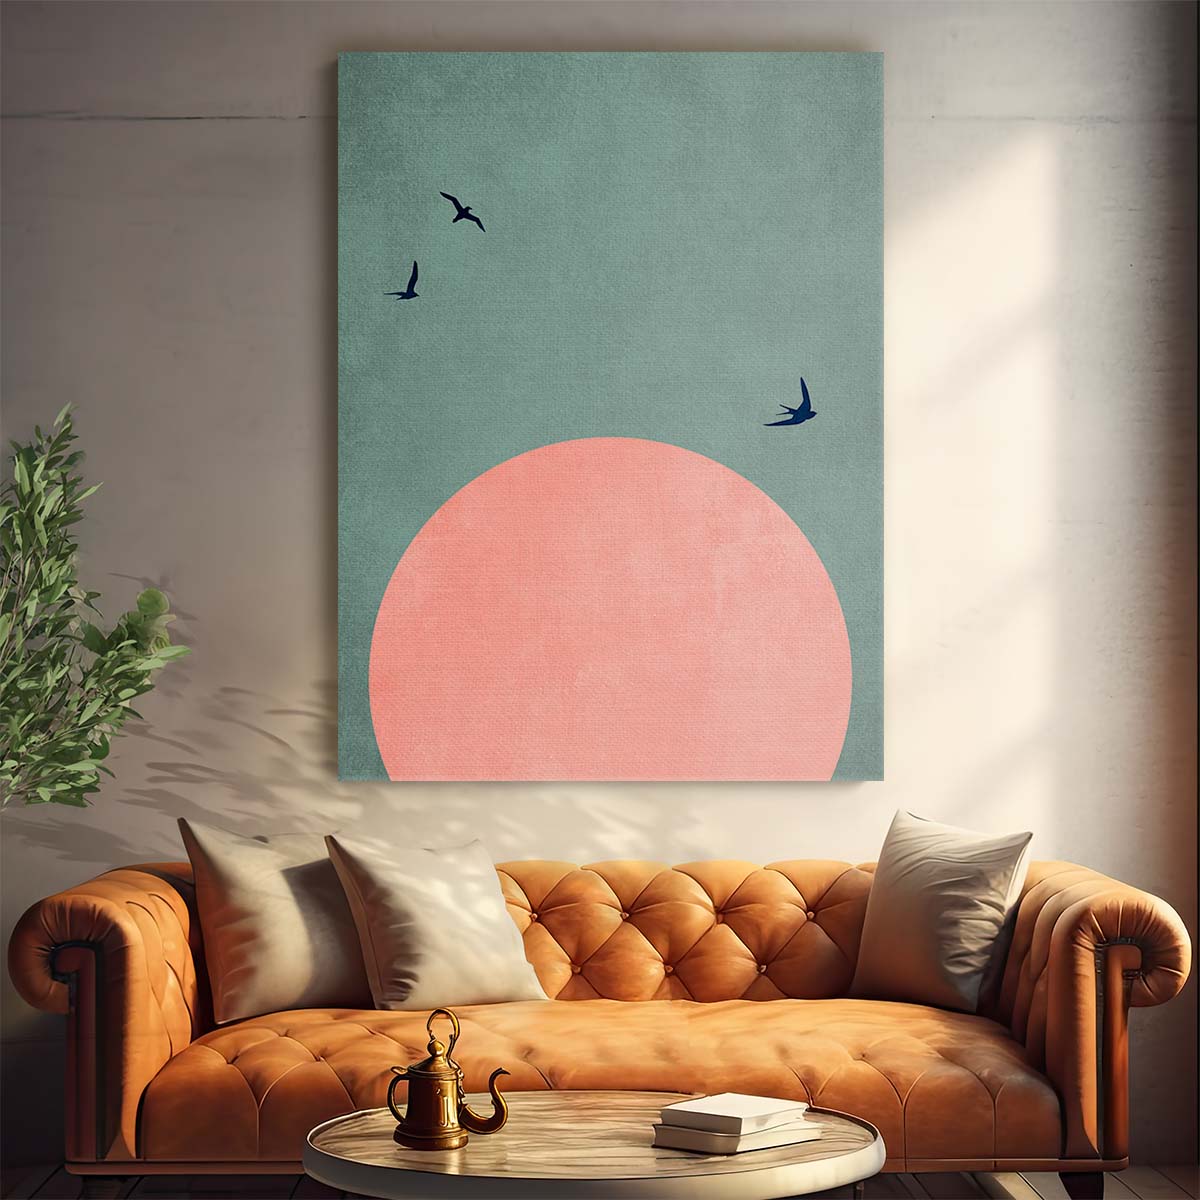 Kubistika's Abstract Geometric Bird Illustration in Nature at Dusk by Luxuriance Designs, made in USA